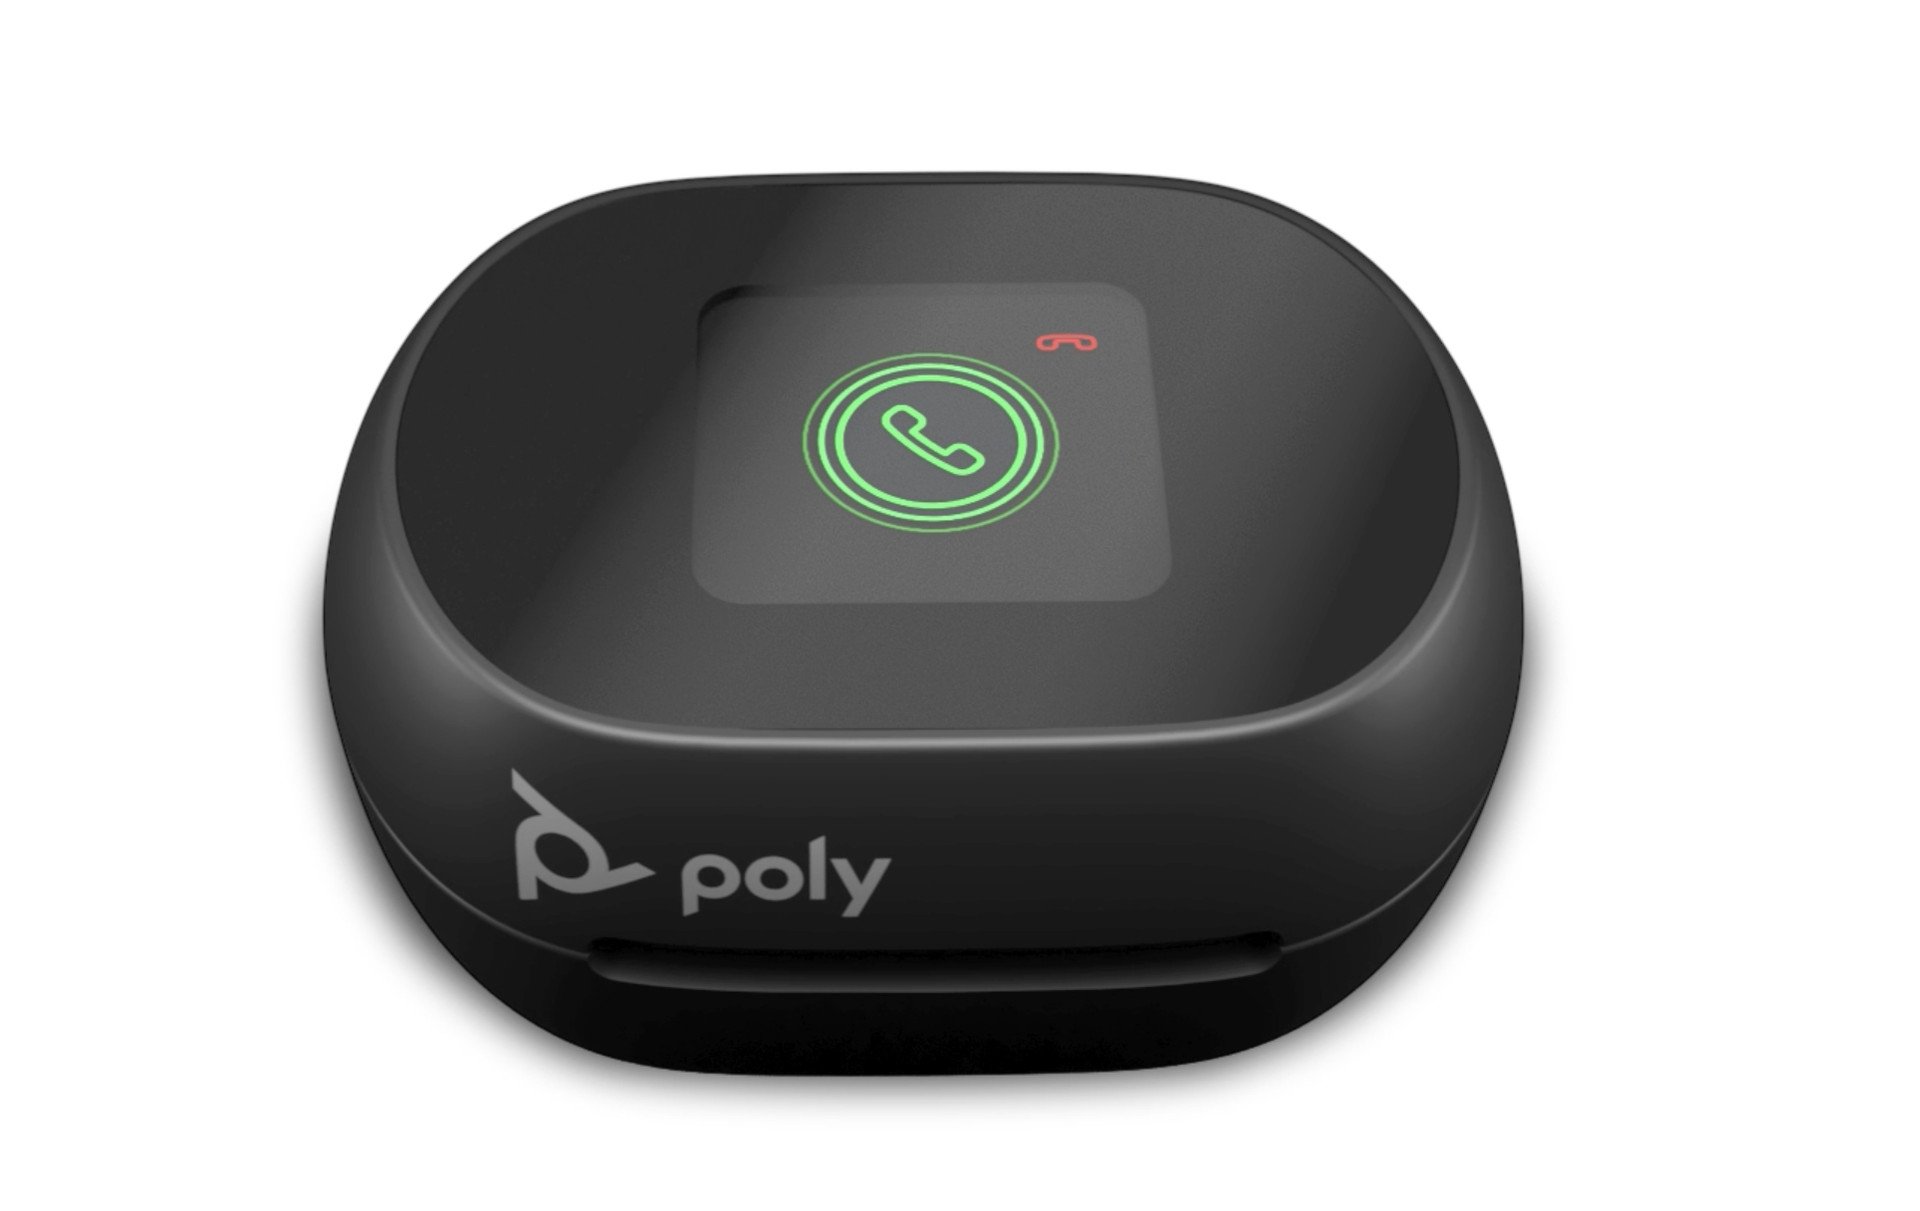 HP offers Poly Voyager Free 60 Plus TWS headphones with a display on the case